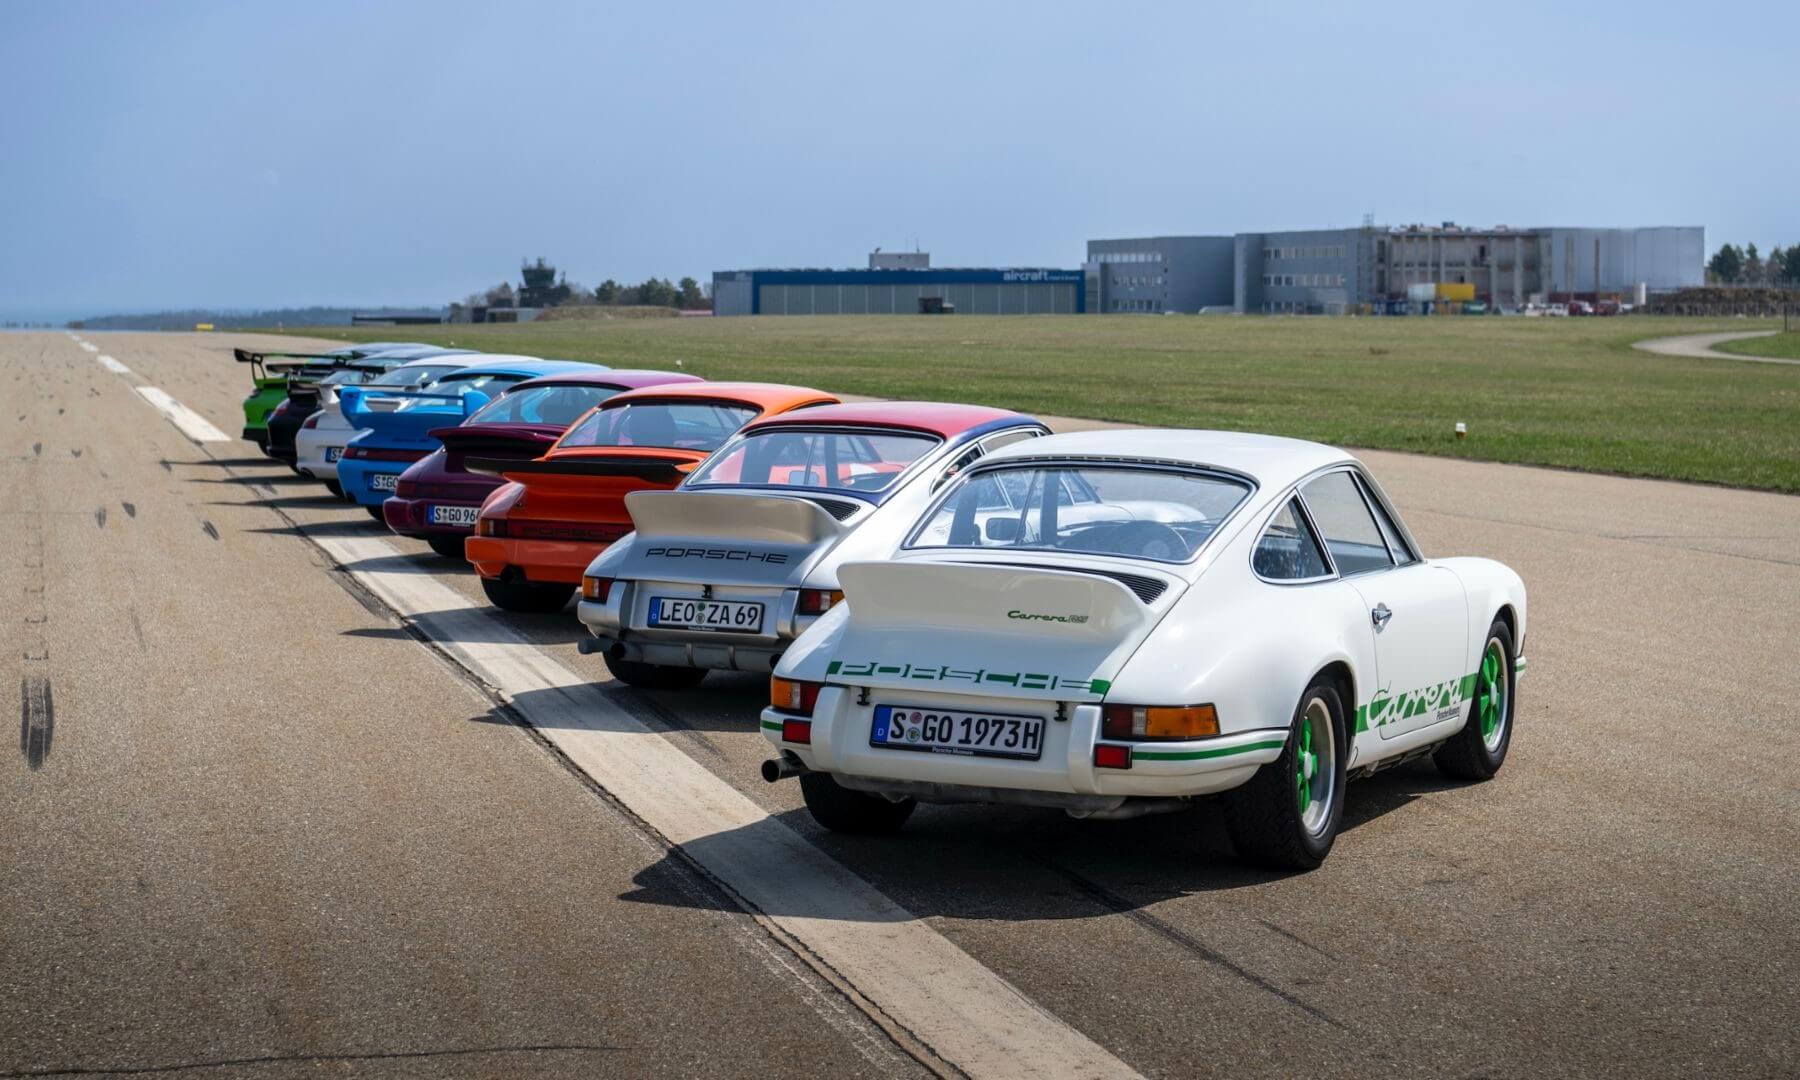 911 Carrera RS 2.7 and family